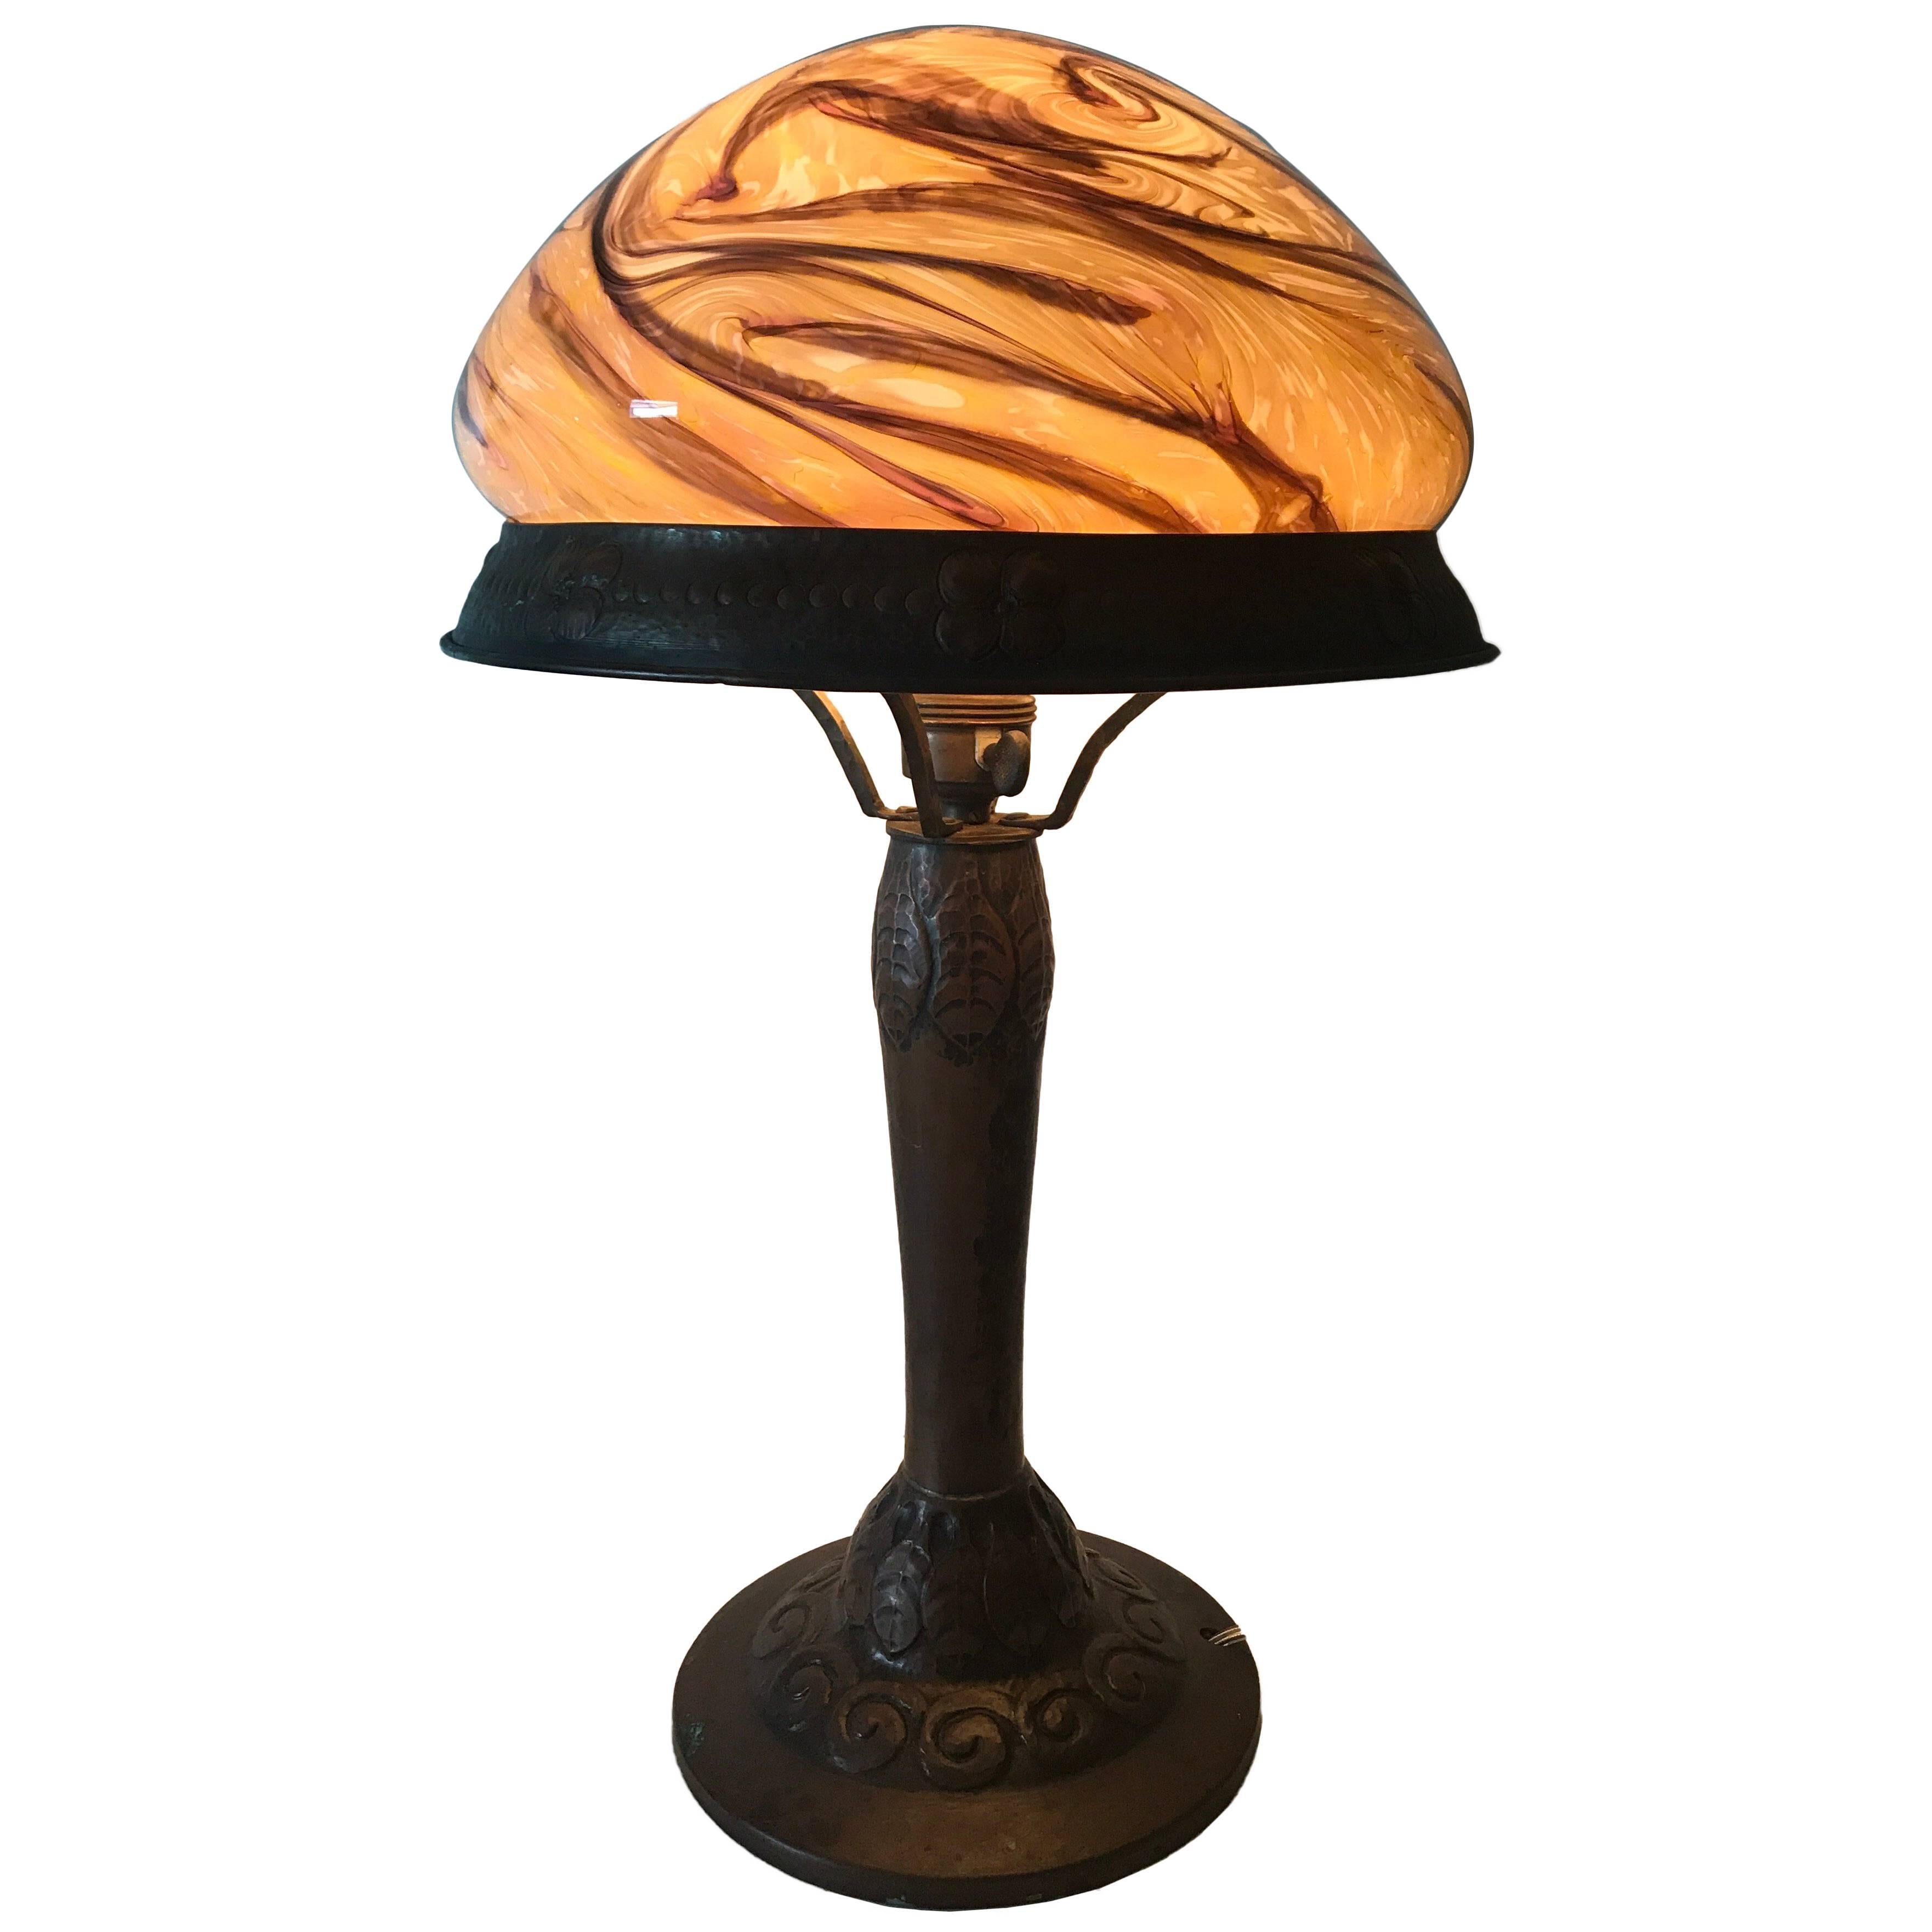 Early 20th Century Swedish Jugend Art Nouveau Copper and Glass Table Lamp For Sale